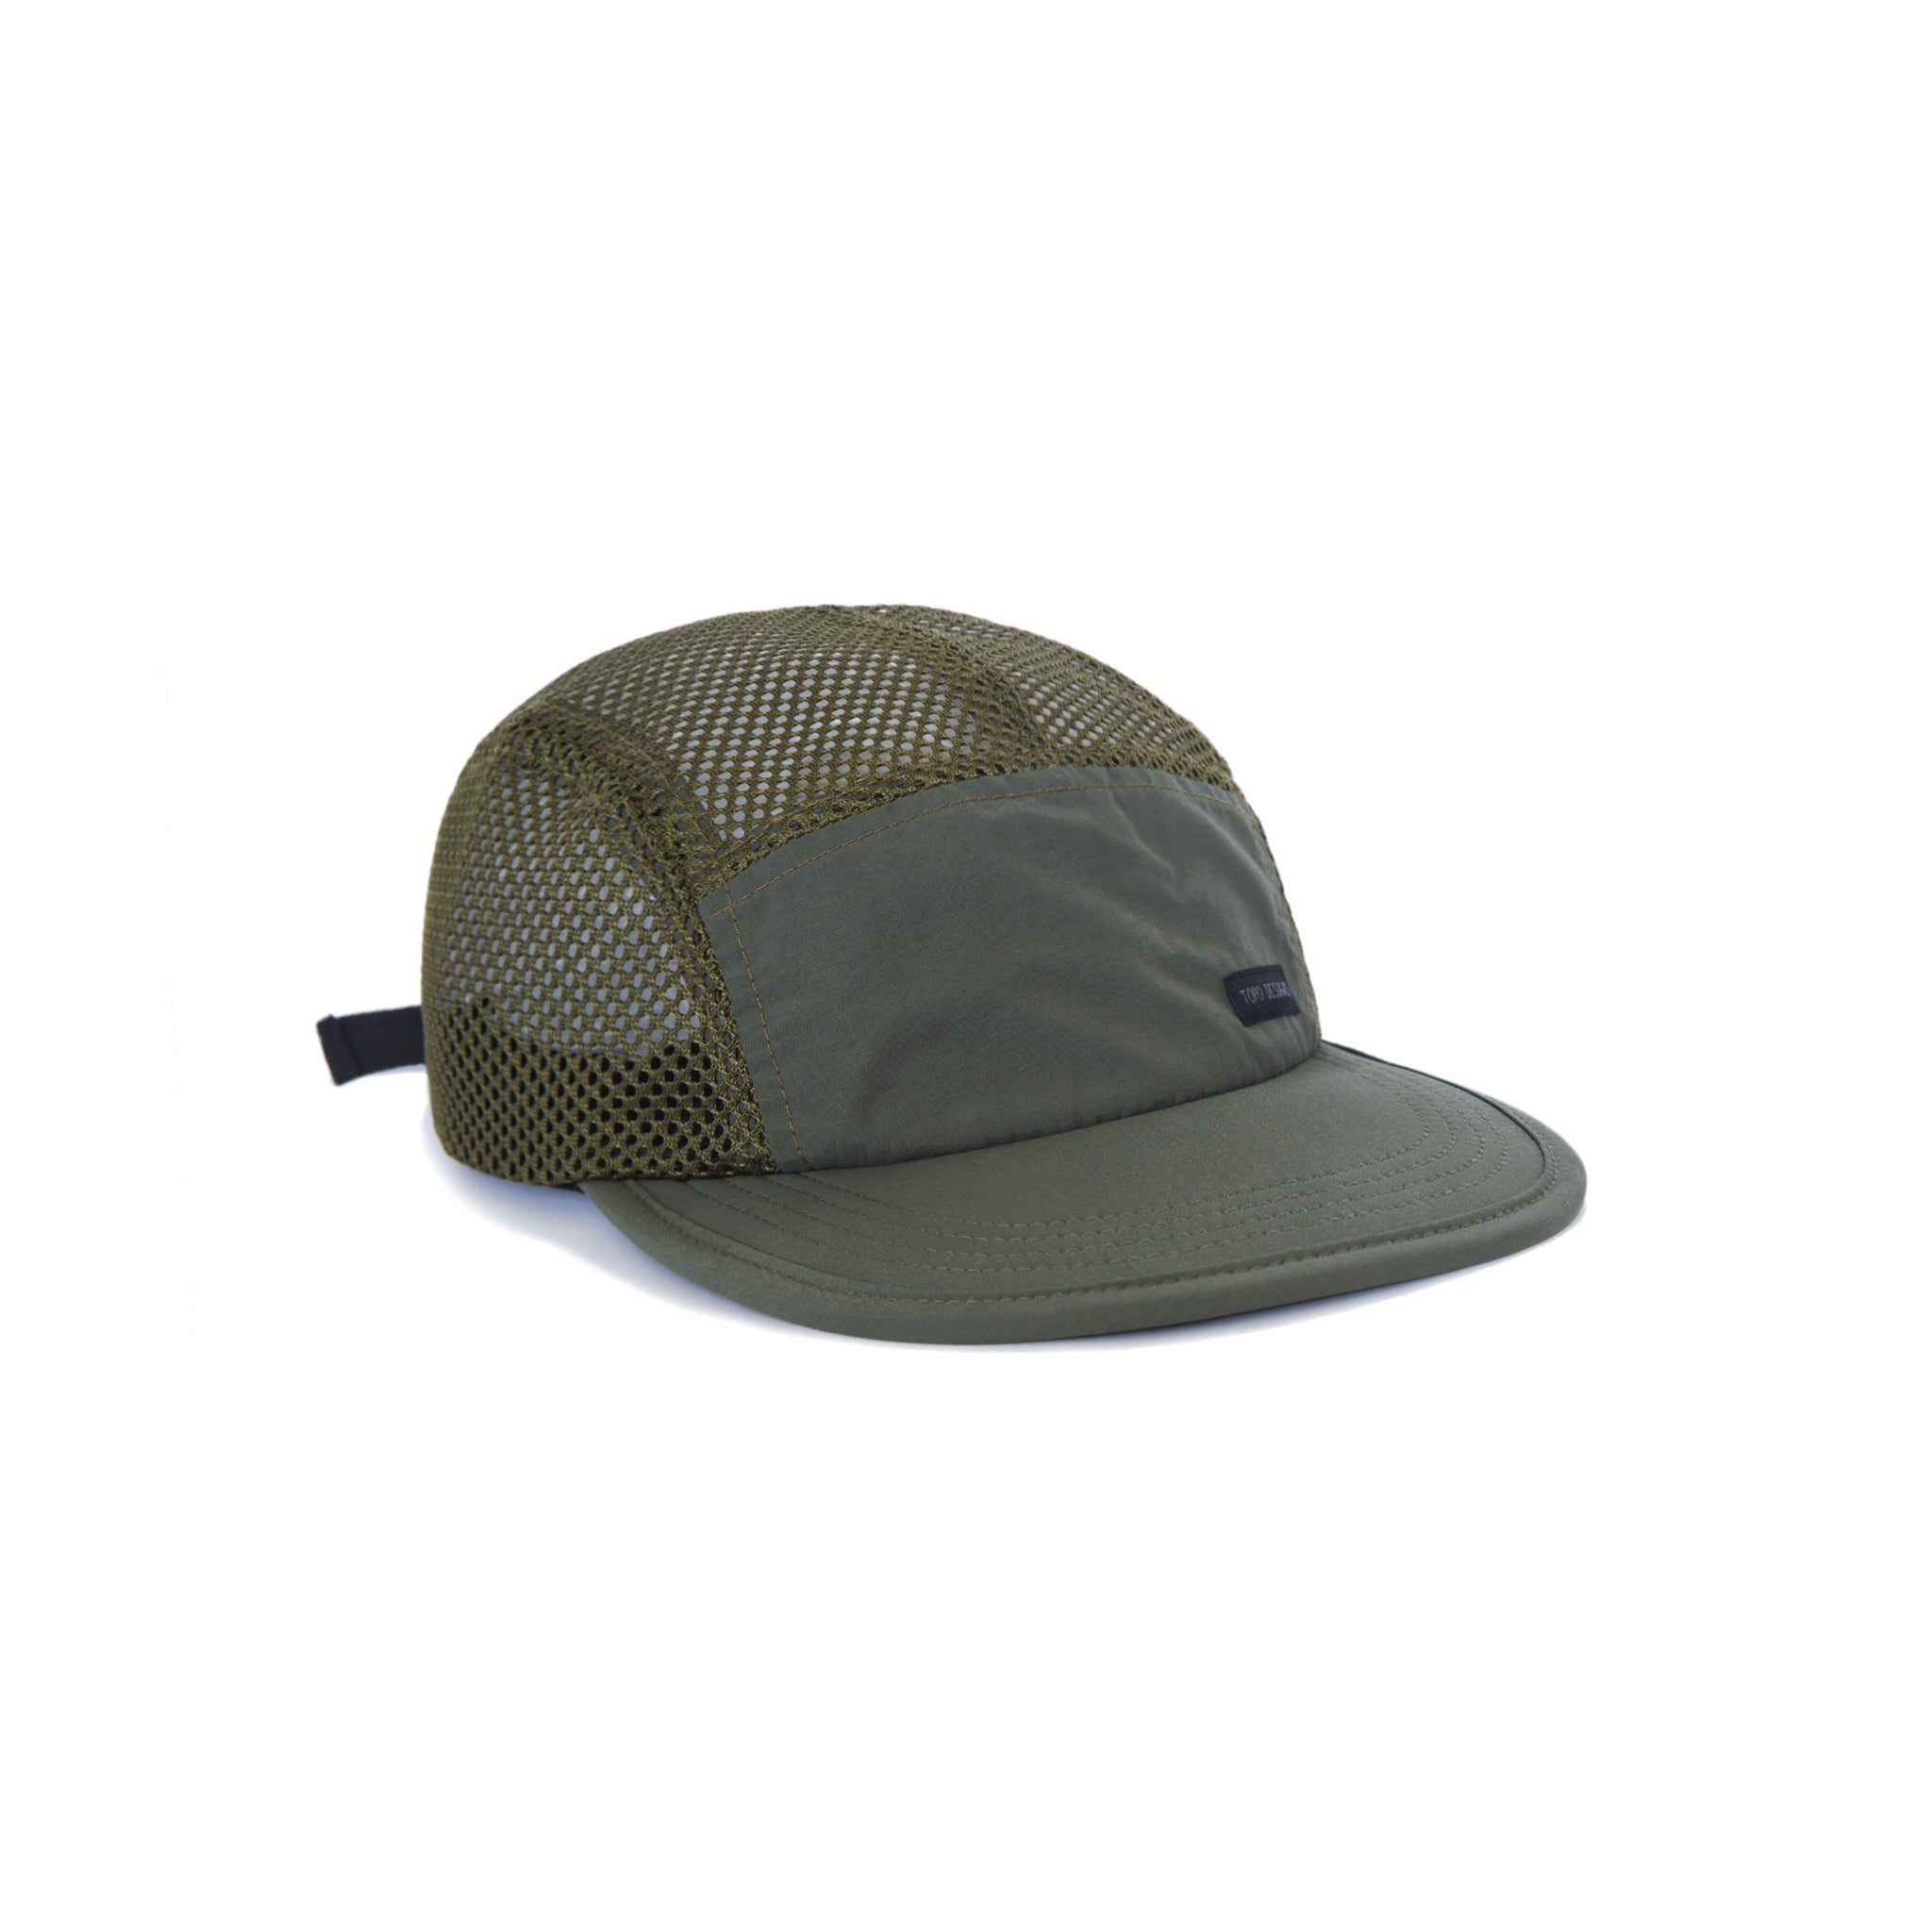 Topo Designs Global mesh back Hat in "Olive" green. Unstructured 5-panel flexible brim packable hat.